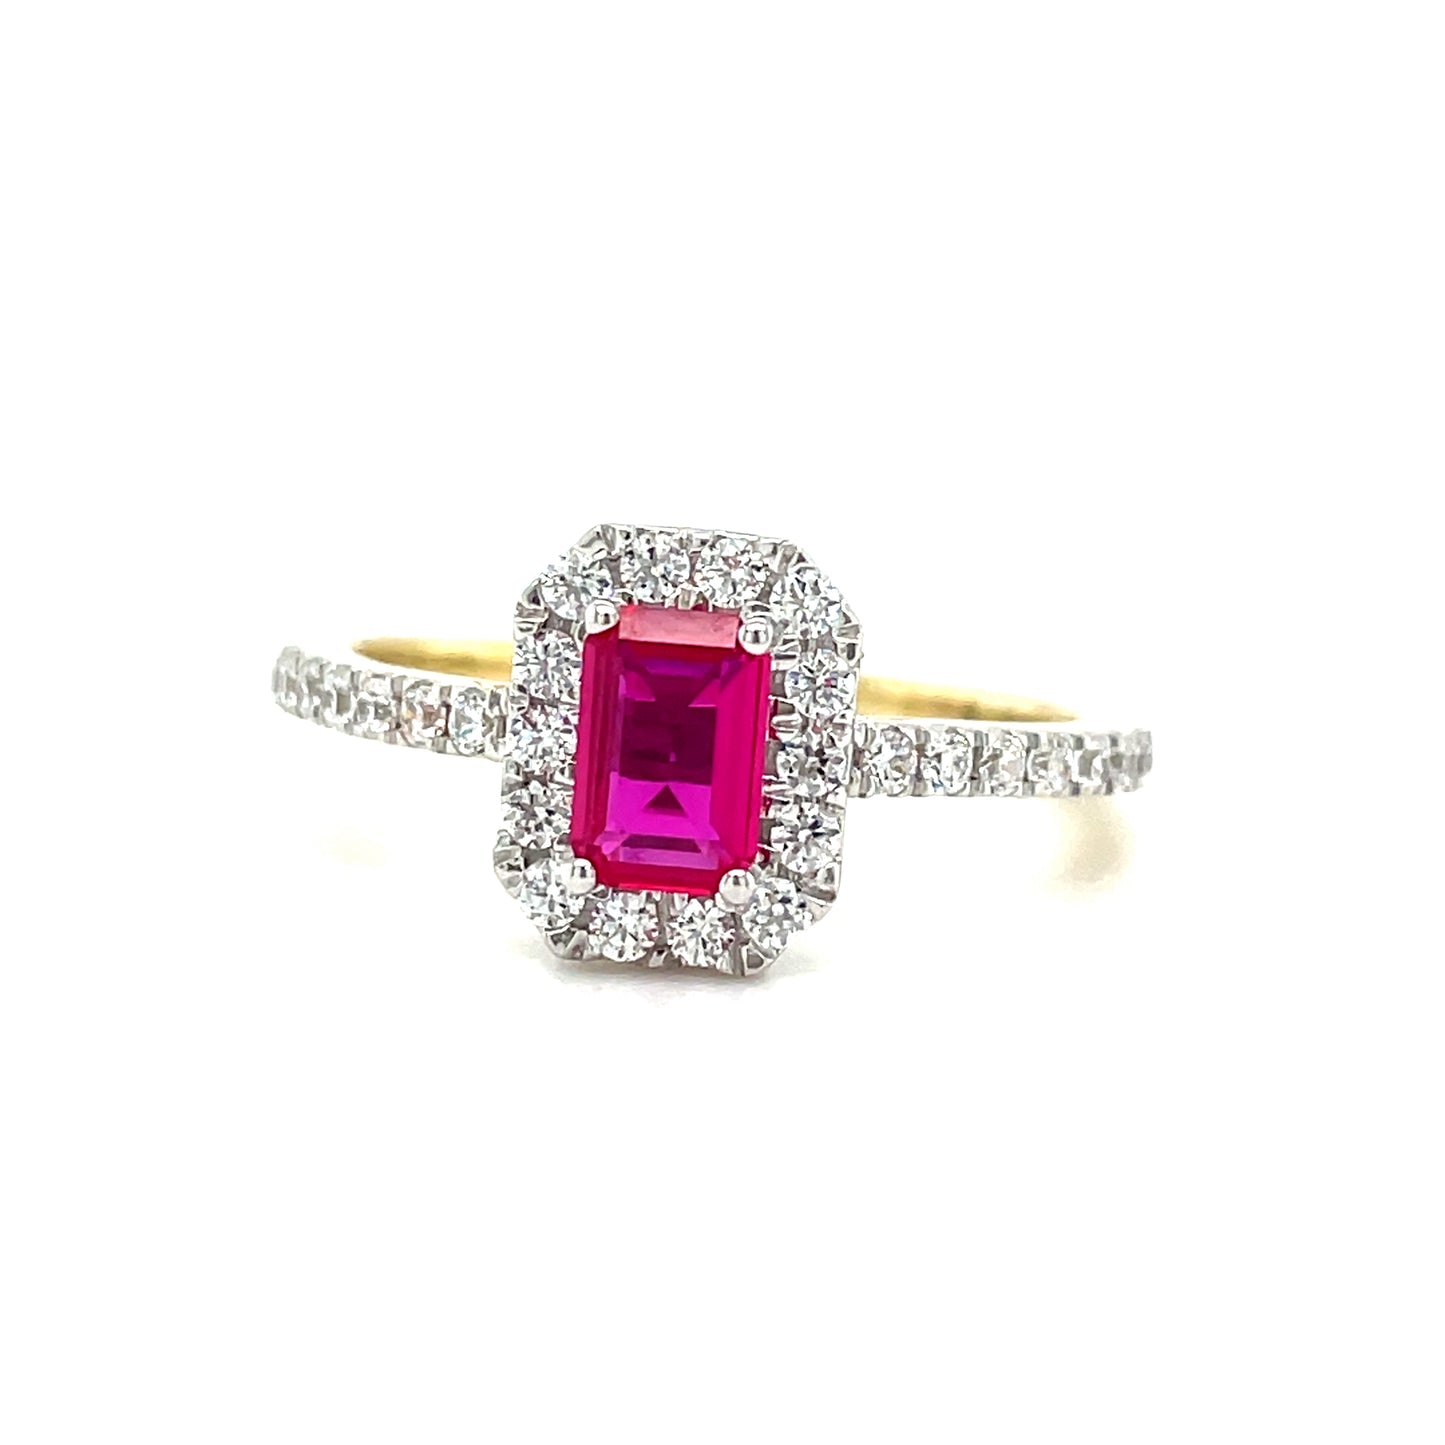 9CT Emerald Cut Halo Cubic Zirconia and Red Stone Dress Ring with Stone Set Shoulders